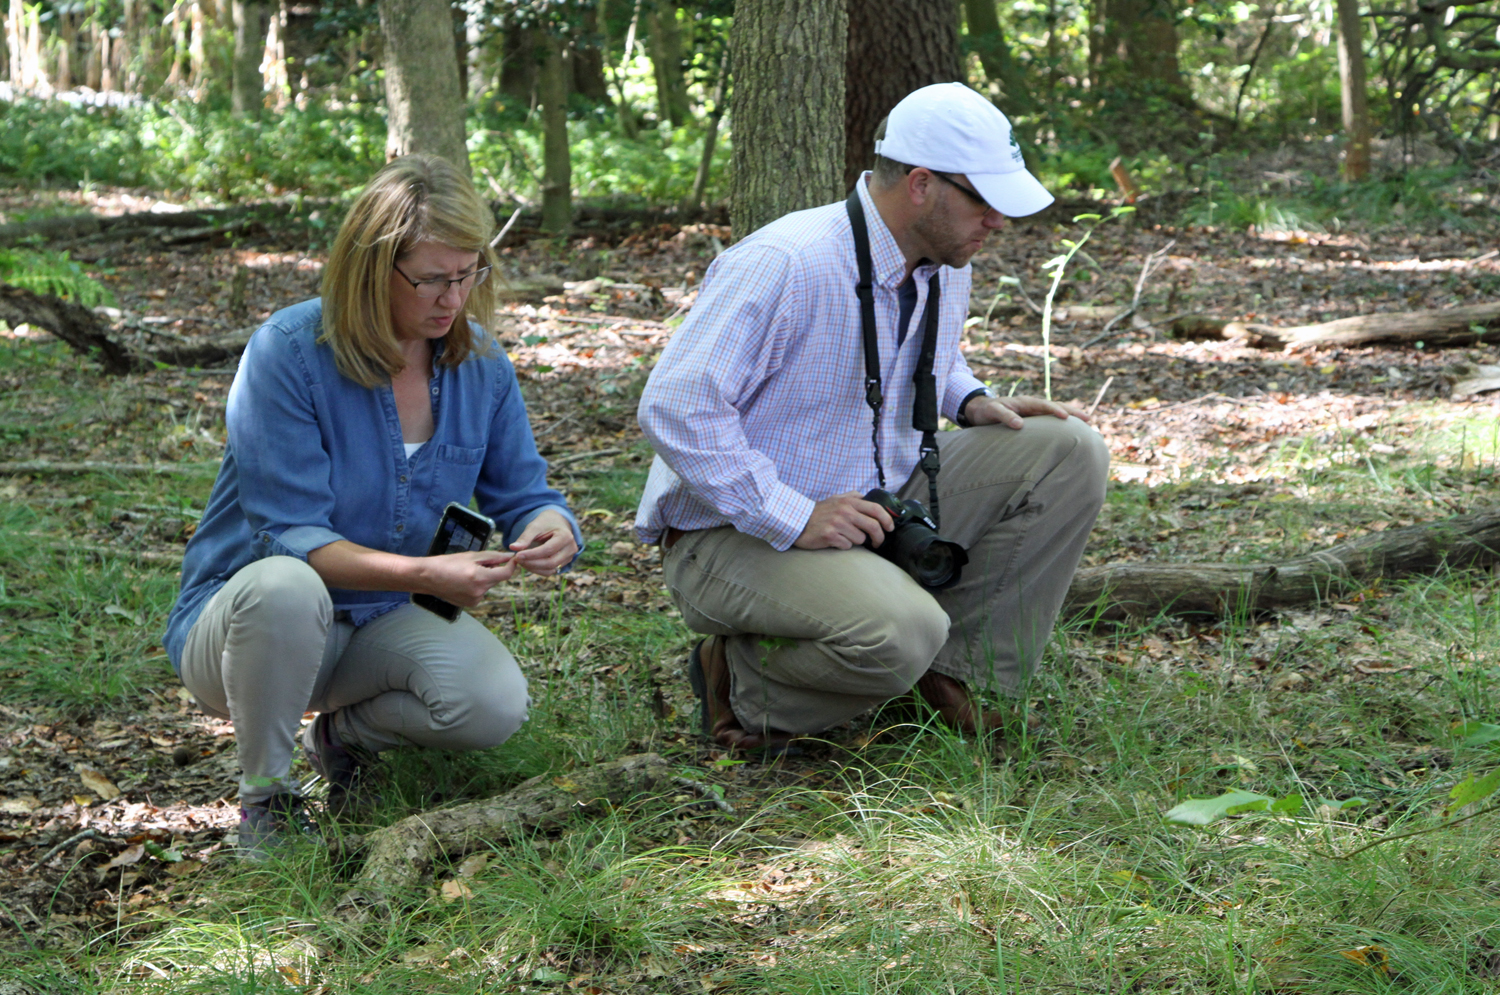 The Garden's woodlands have several naturally-occurring native sedges. Shannon Currey and Richard Olsen took a closer look.